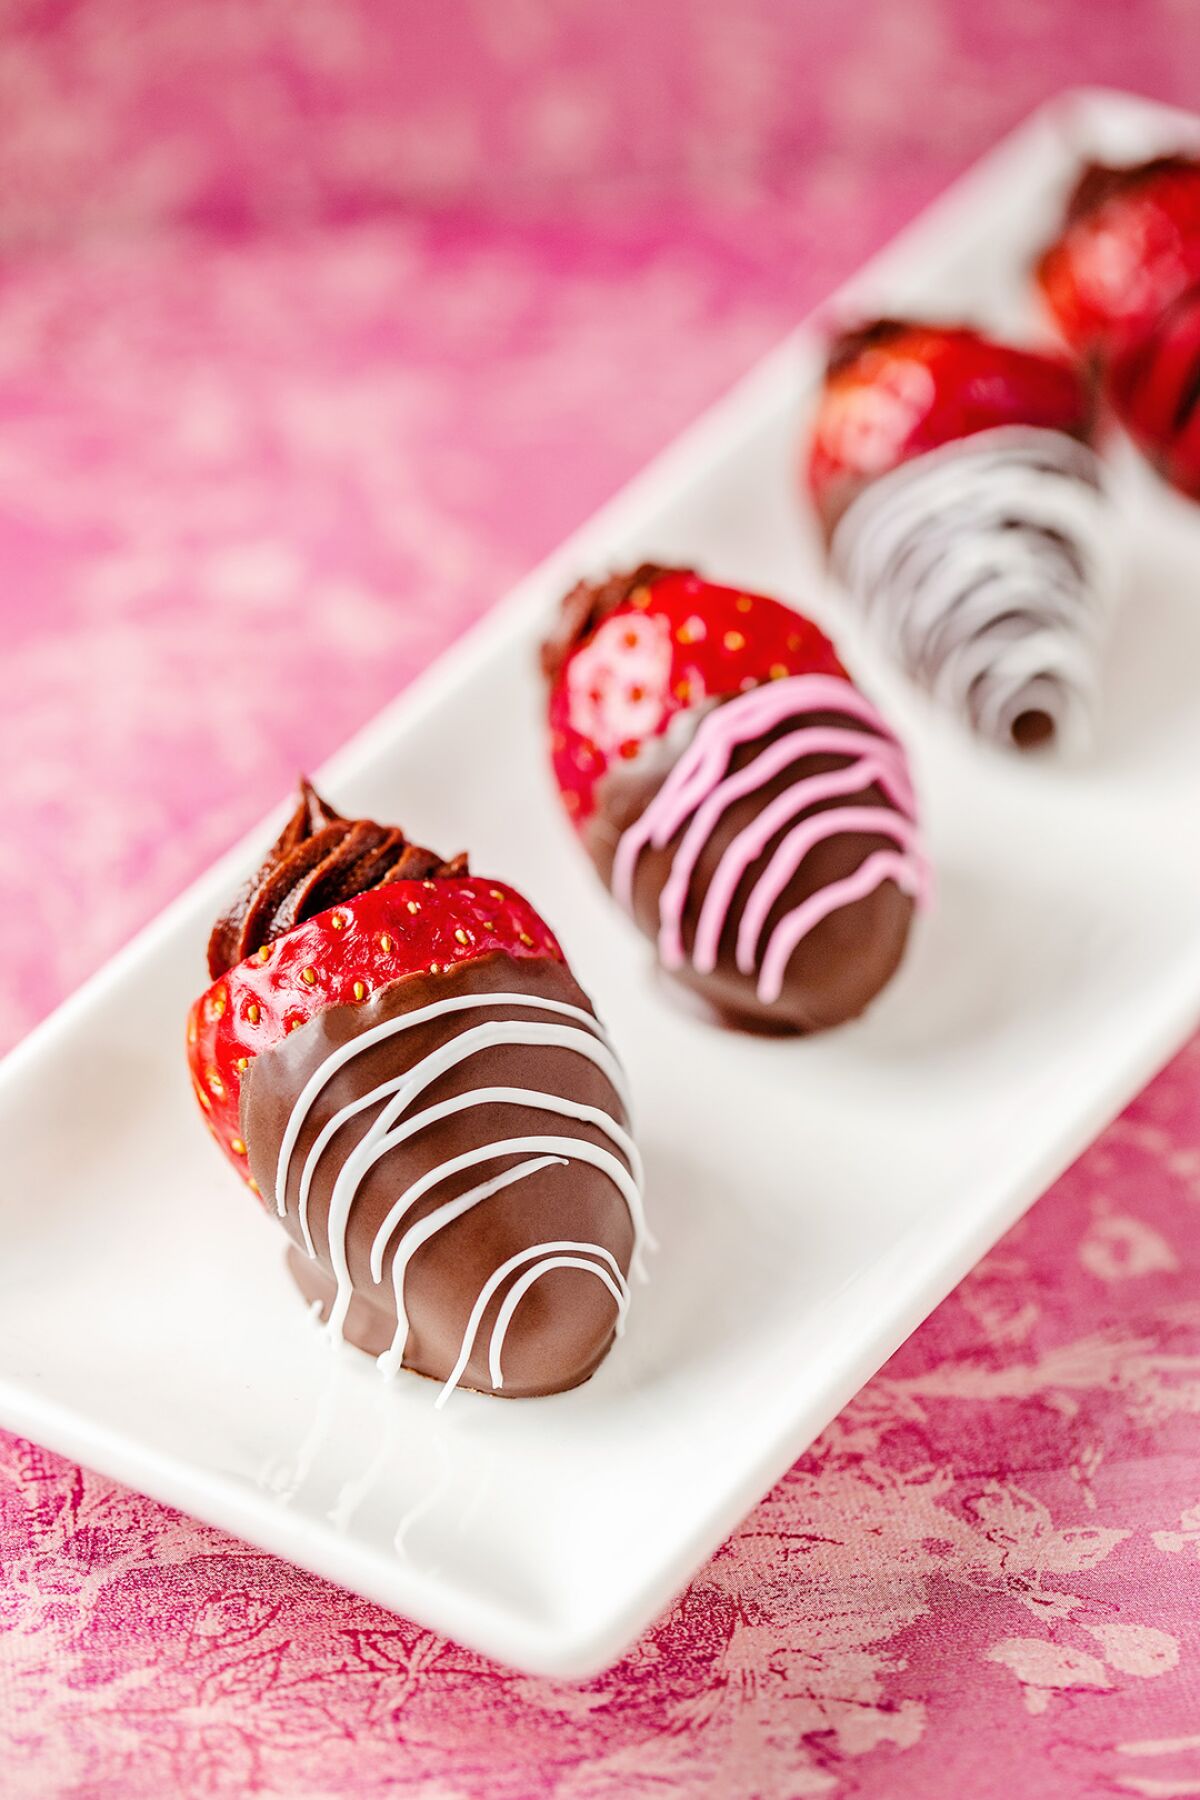 Chocolate-dipped strawberries stuffed with chocolate and Nutella-flavored cream cheese.